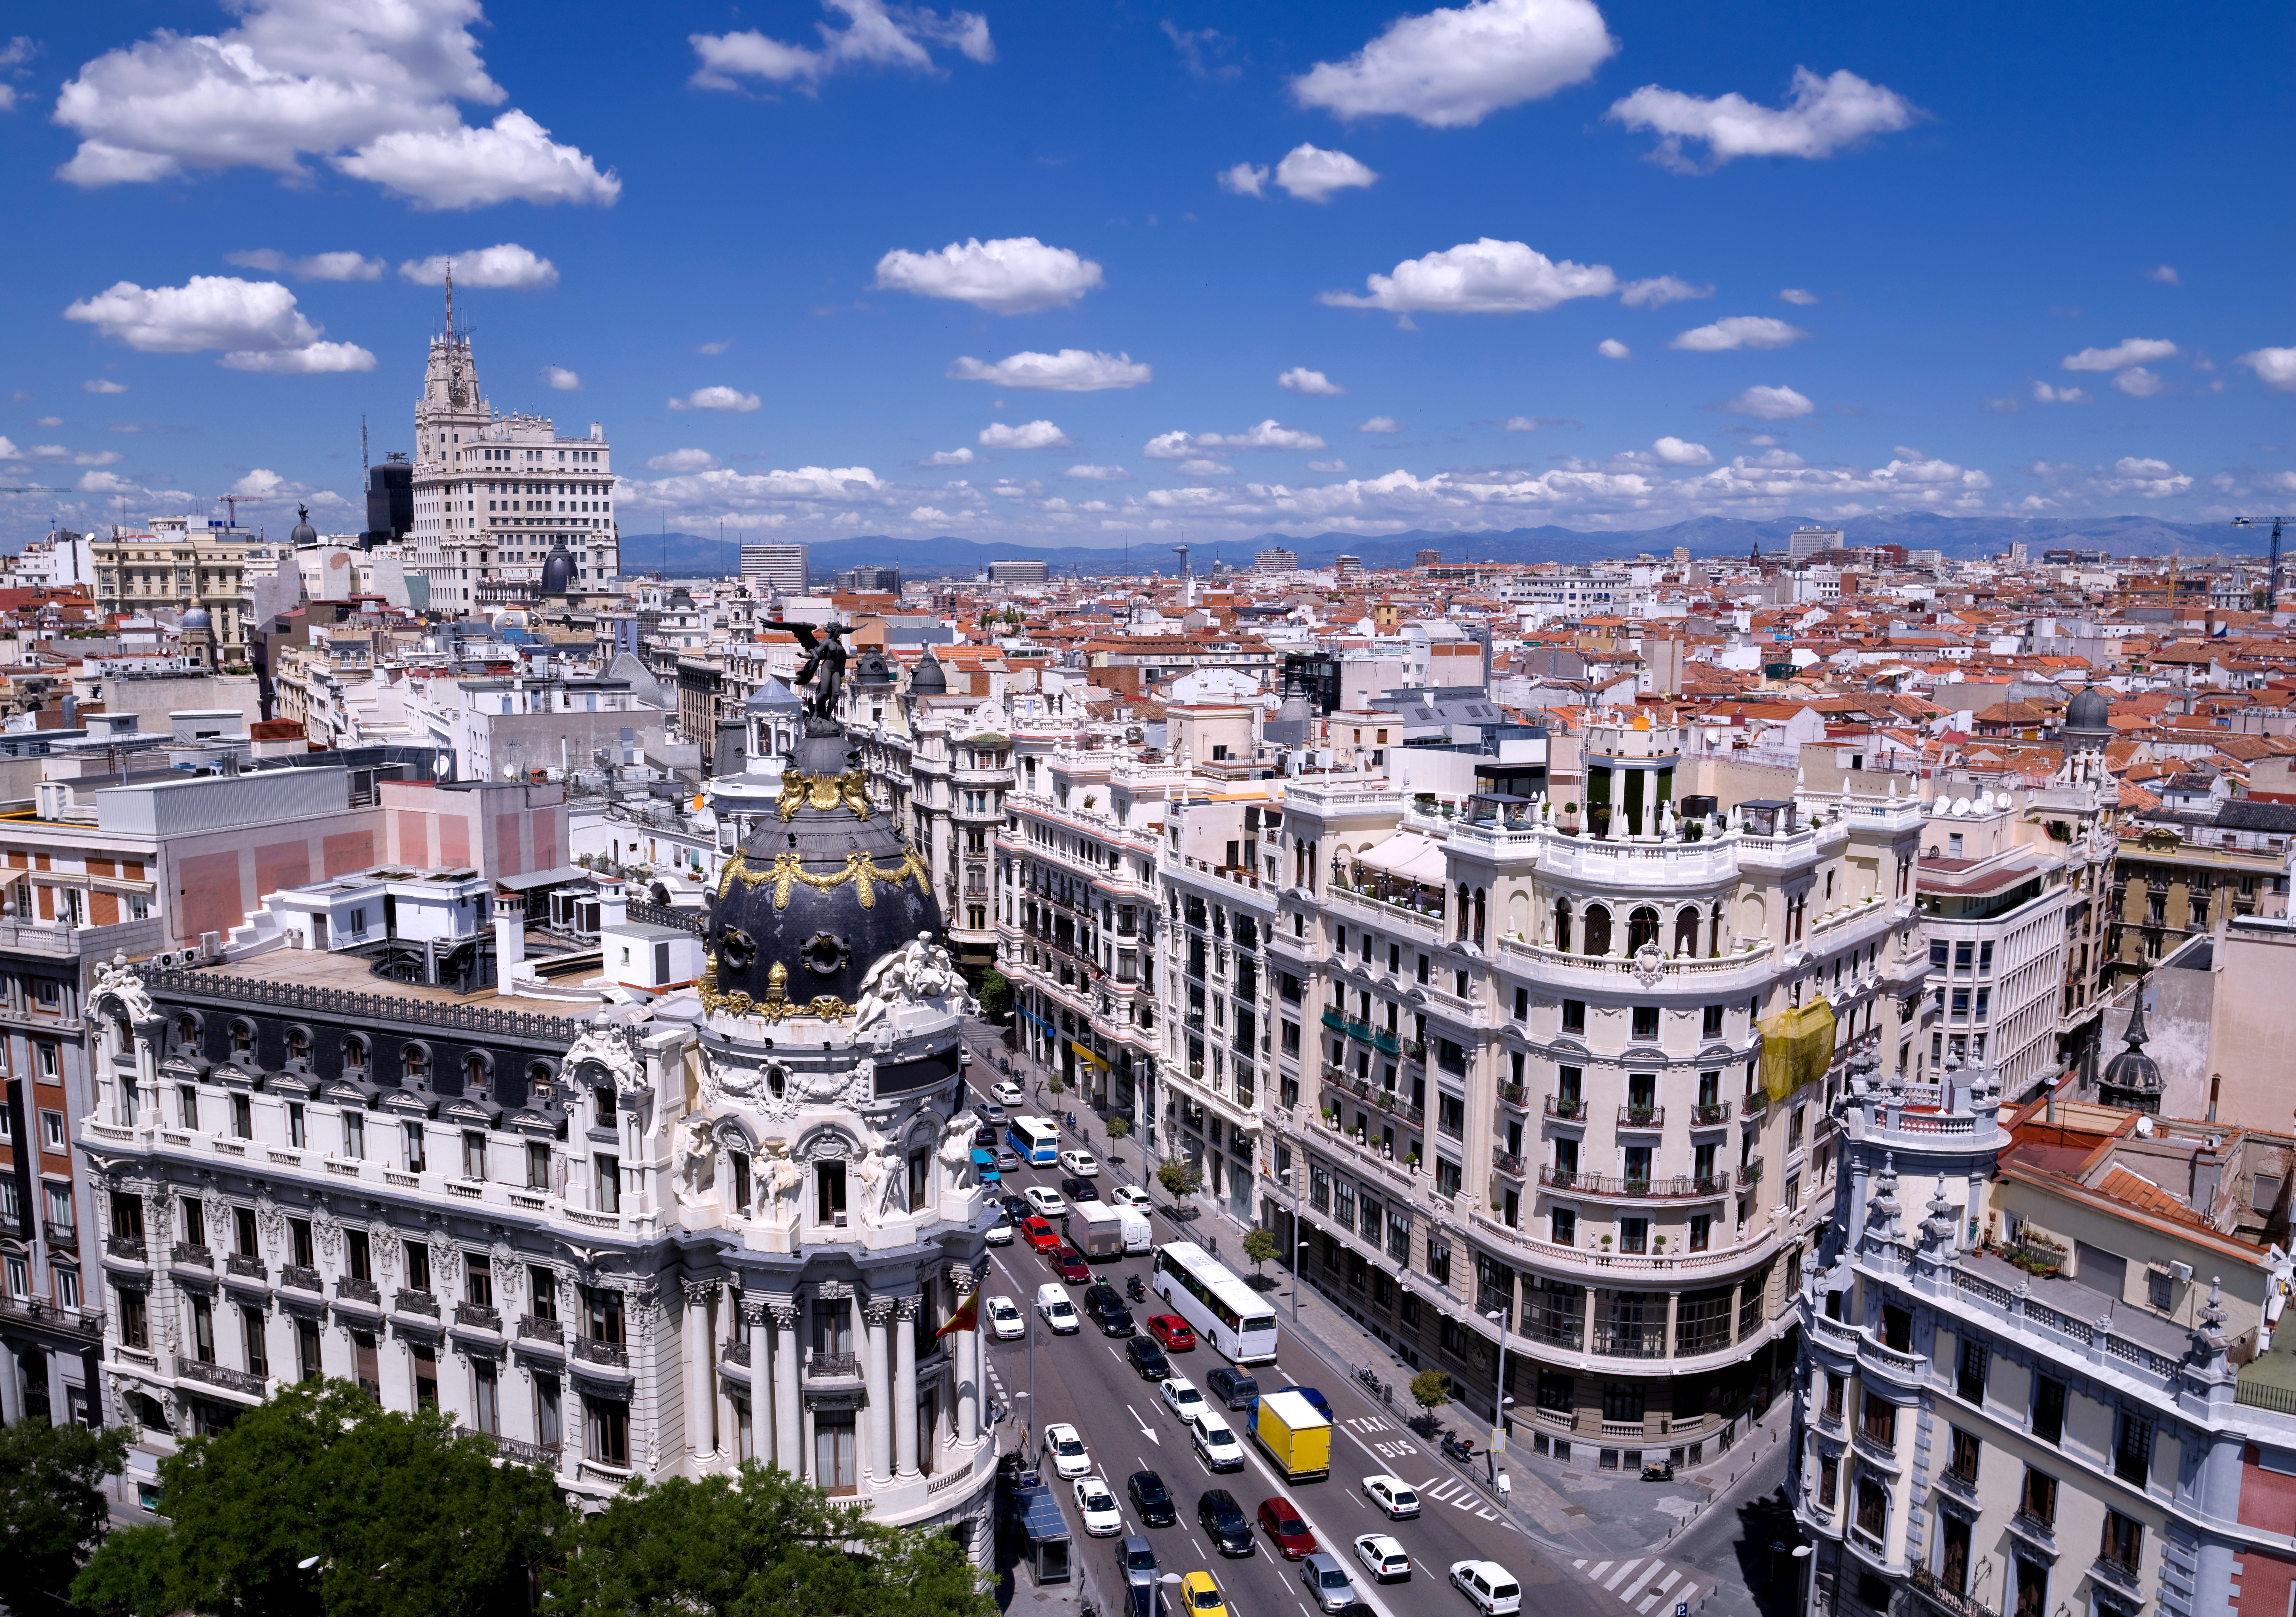 madrid, man made, building, city, cityscape, spain